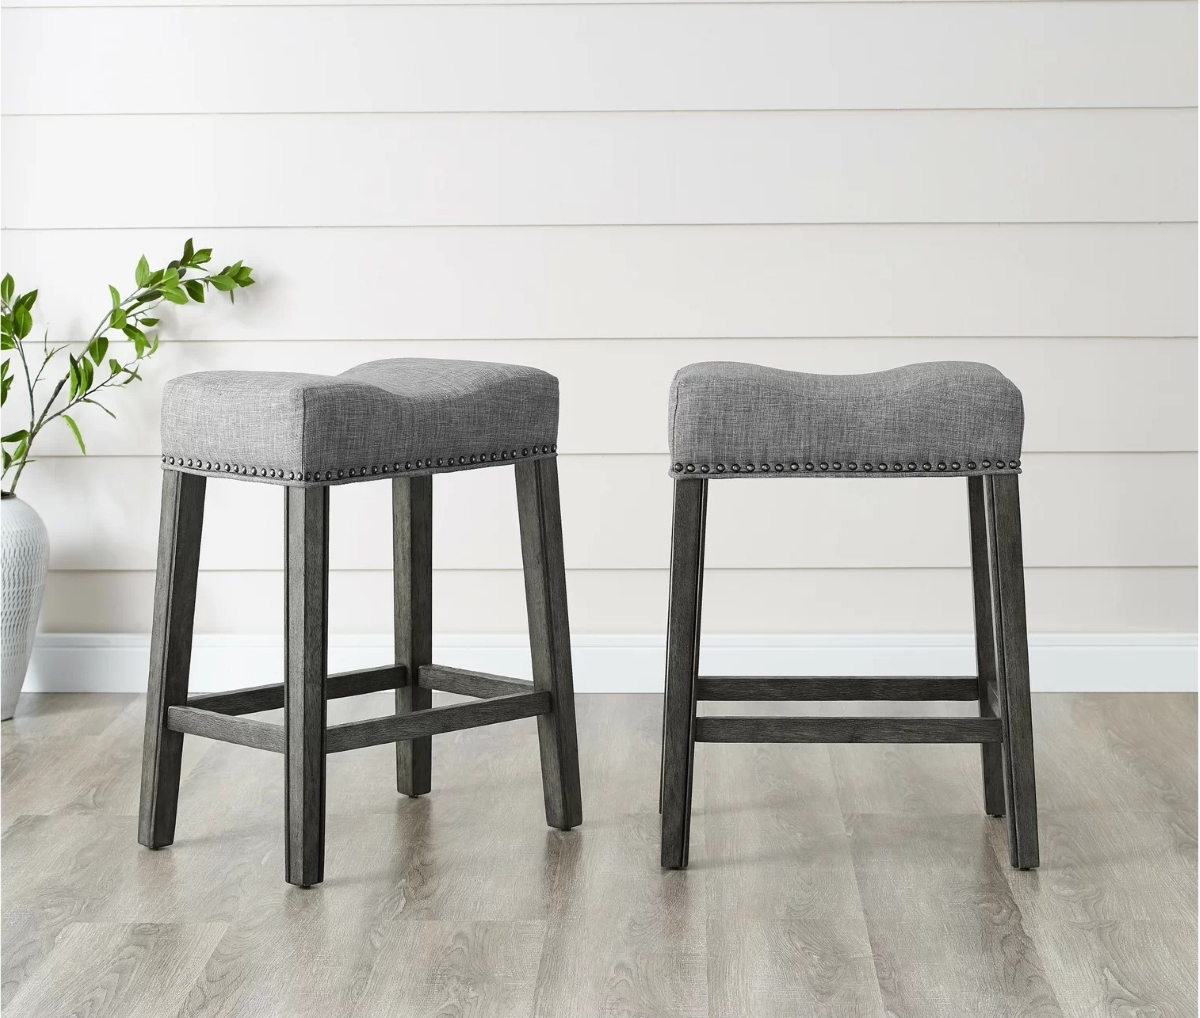 Two counter seats with gray fabric seats and wooden frames.